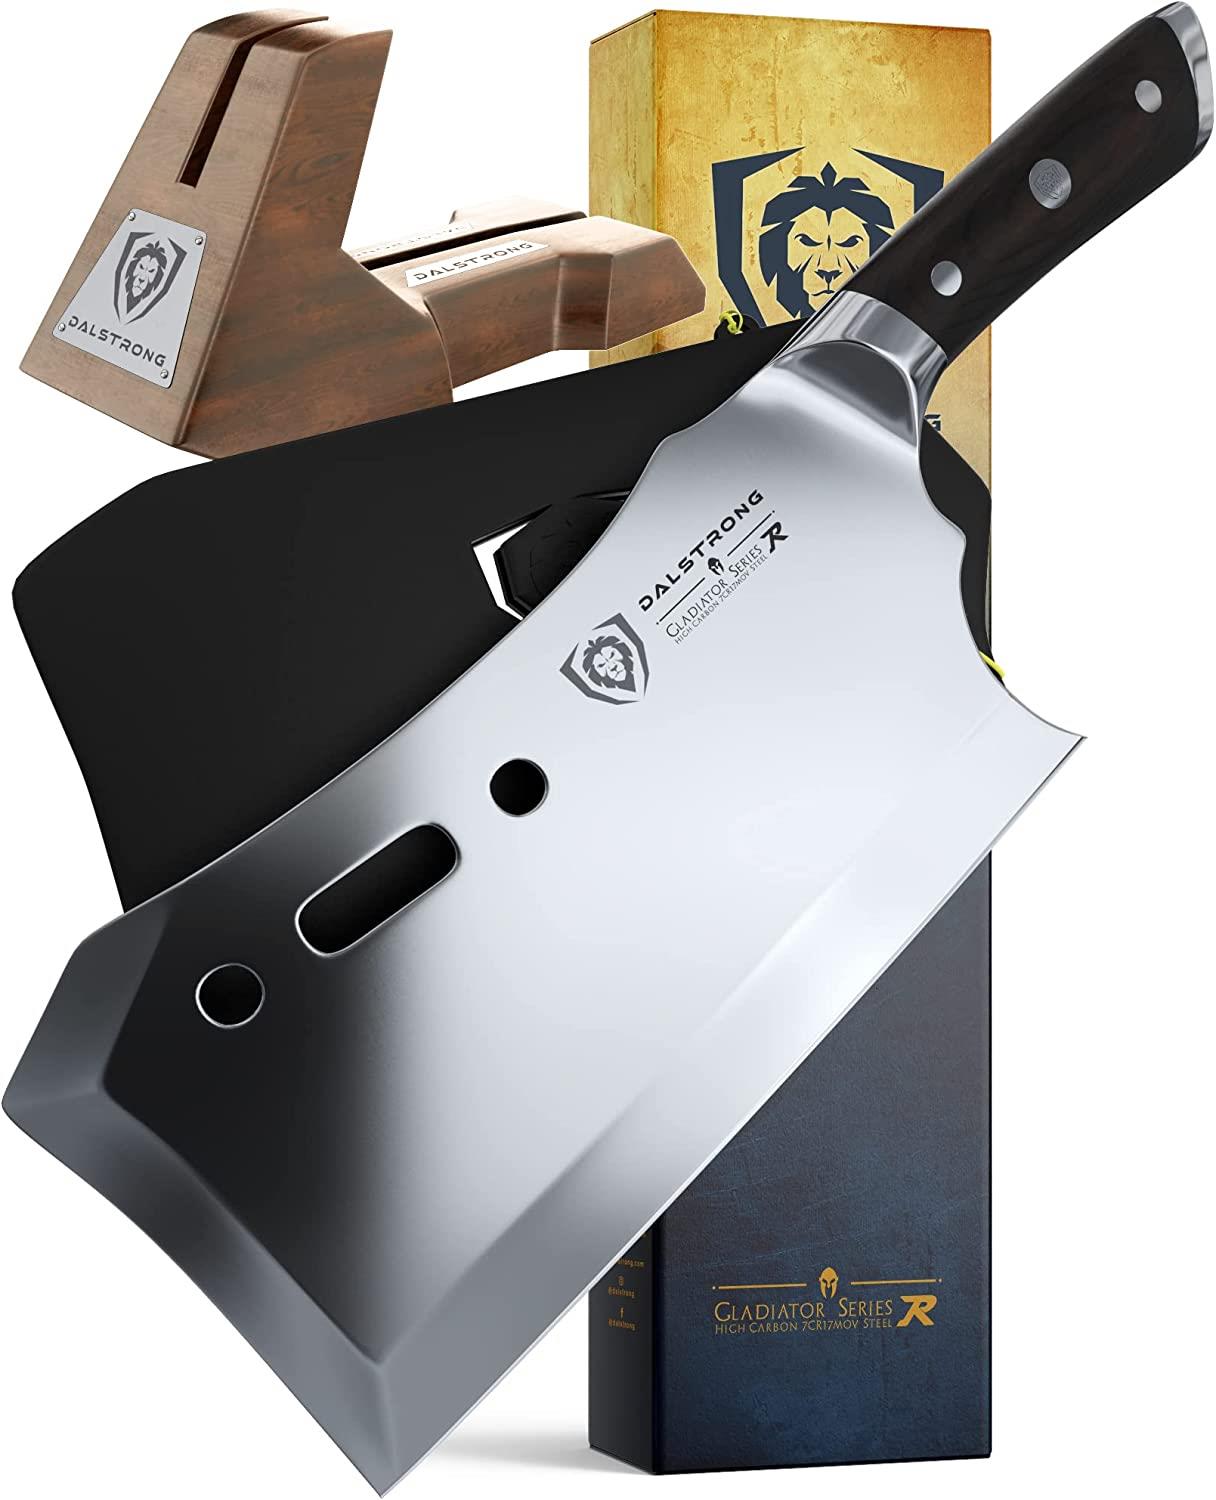 Dalstrong Heavy Duty Obliterator Meat Cleaver - 9 Blade German Steel  with Included Display Stand